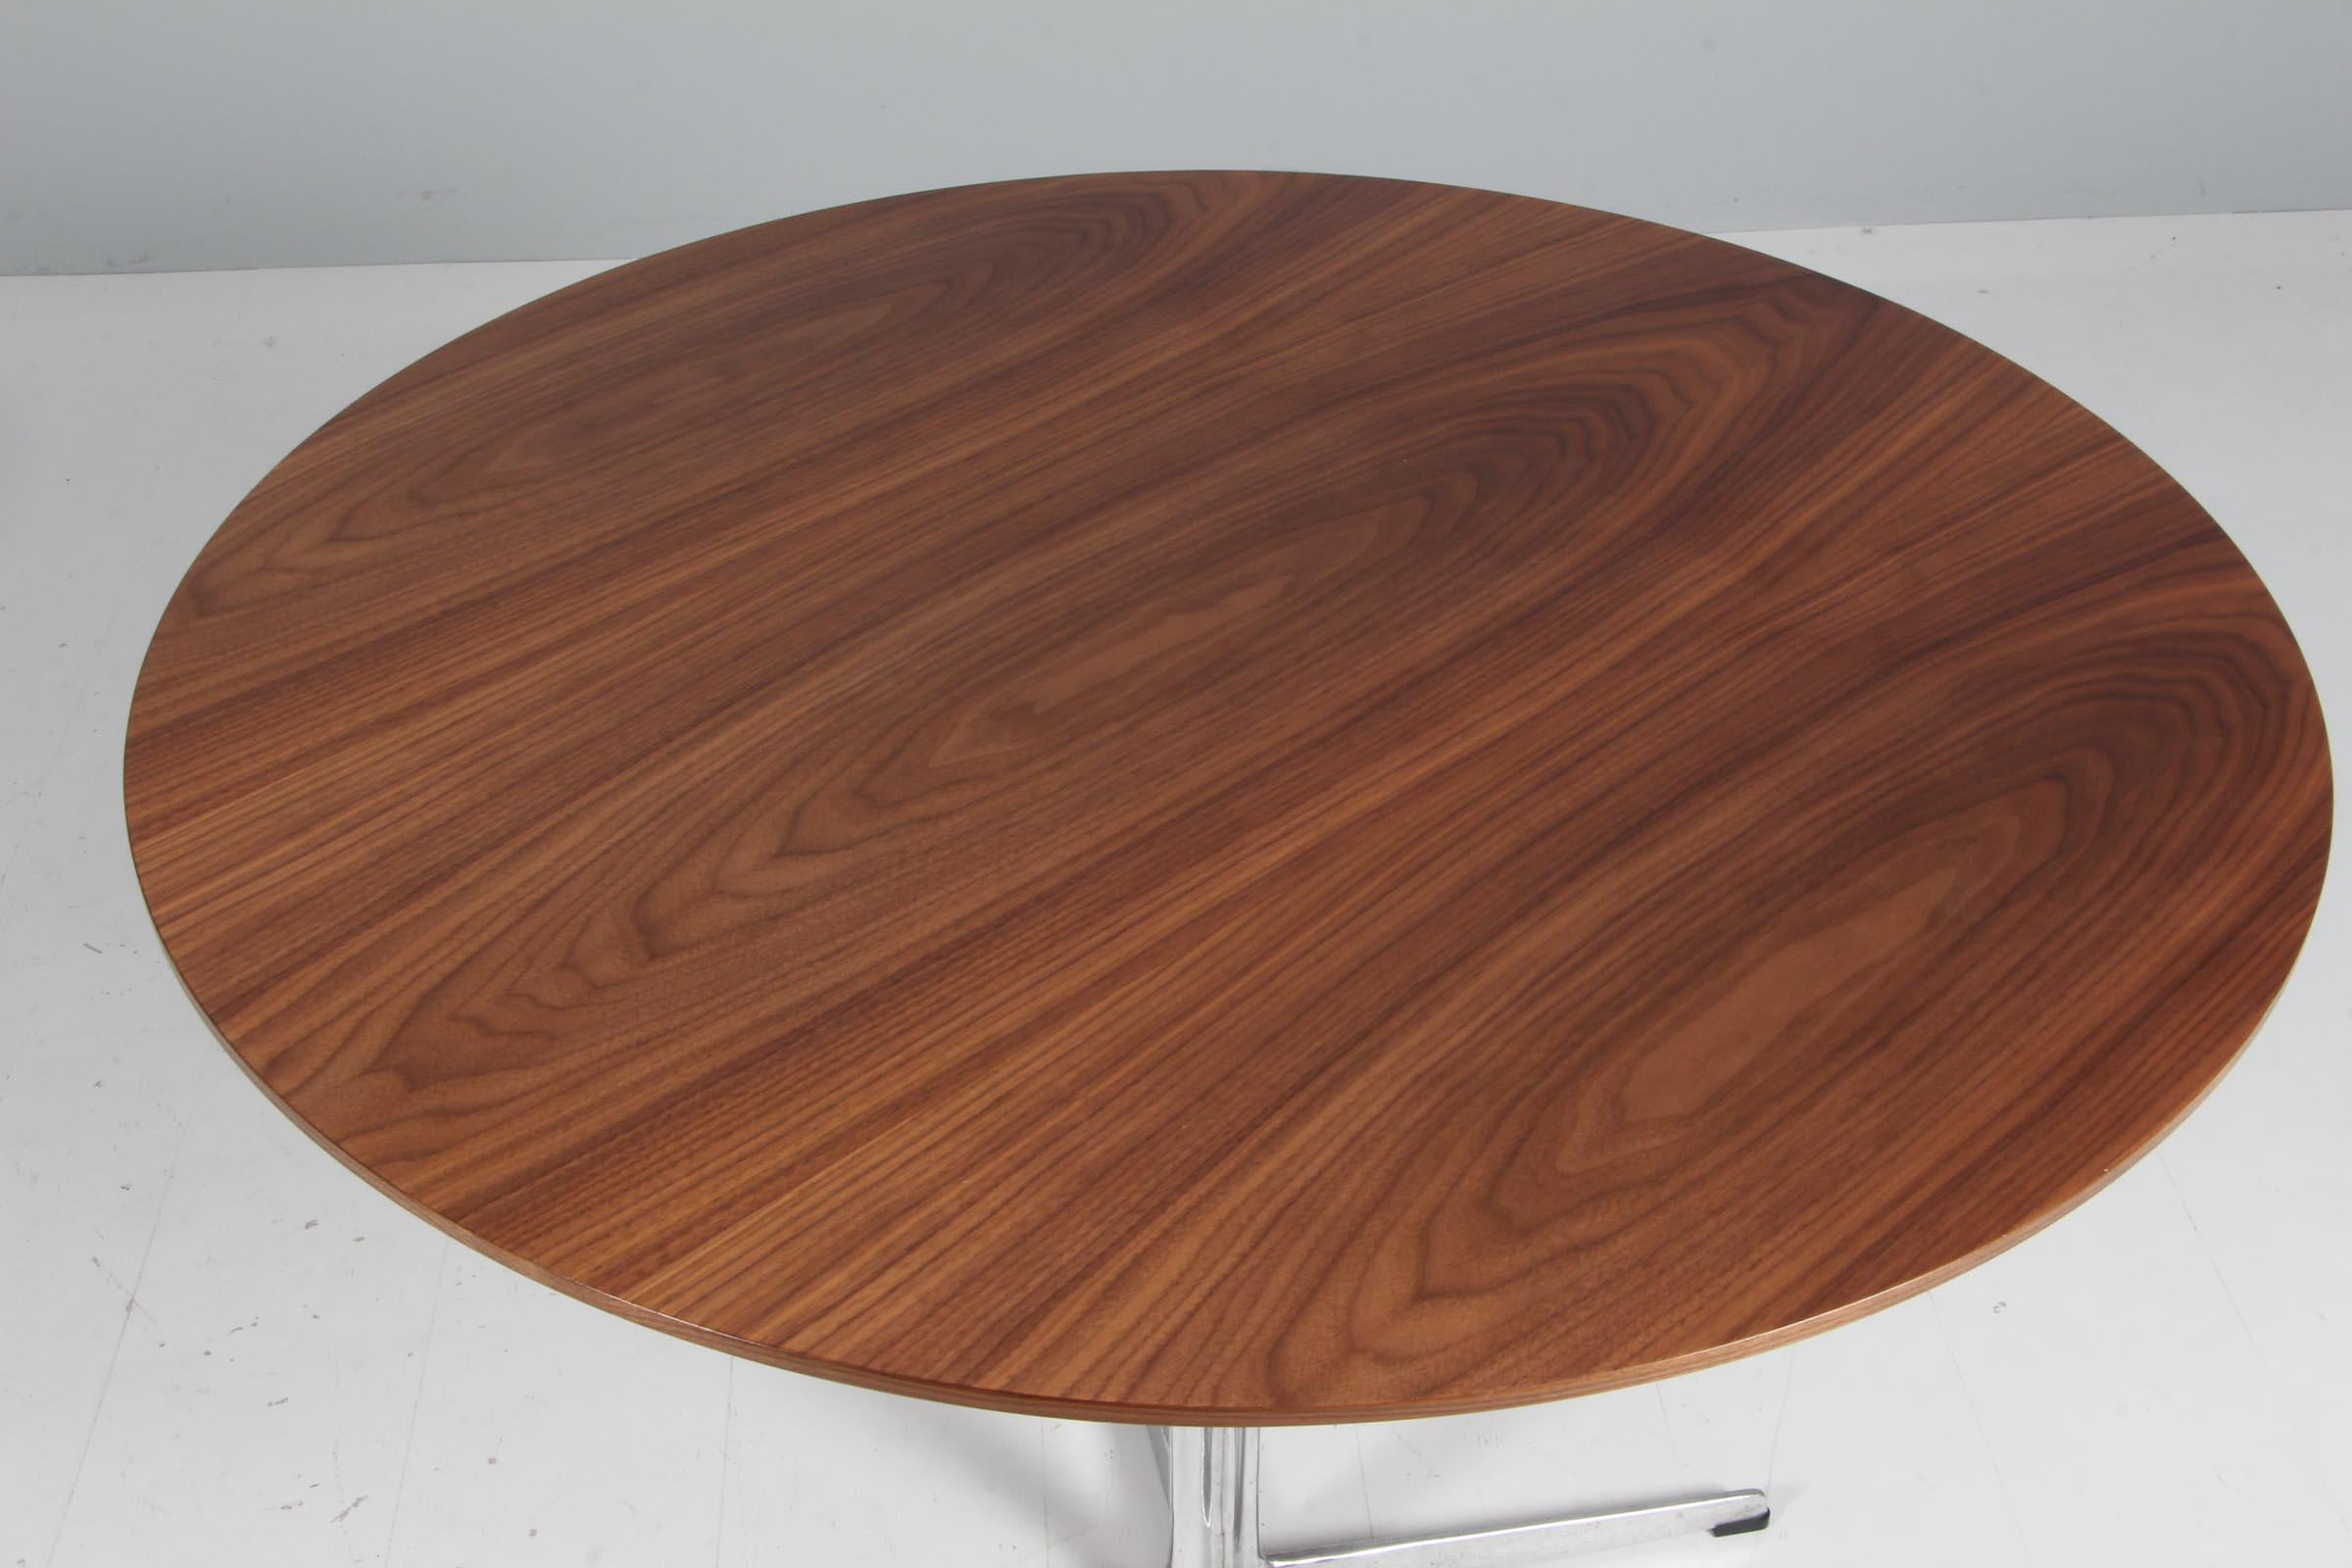 Piet Hein & Arne Jacobsen café table with plate of veenered walnut.

Four star base of aluminium and steel.

Made by Fritz Hansen.